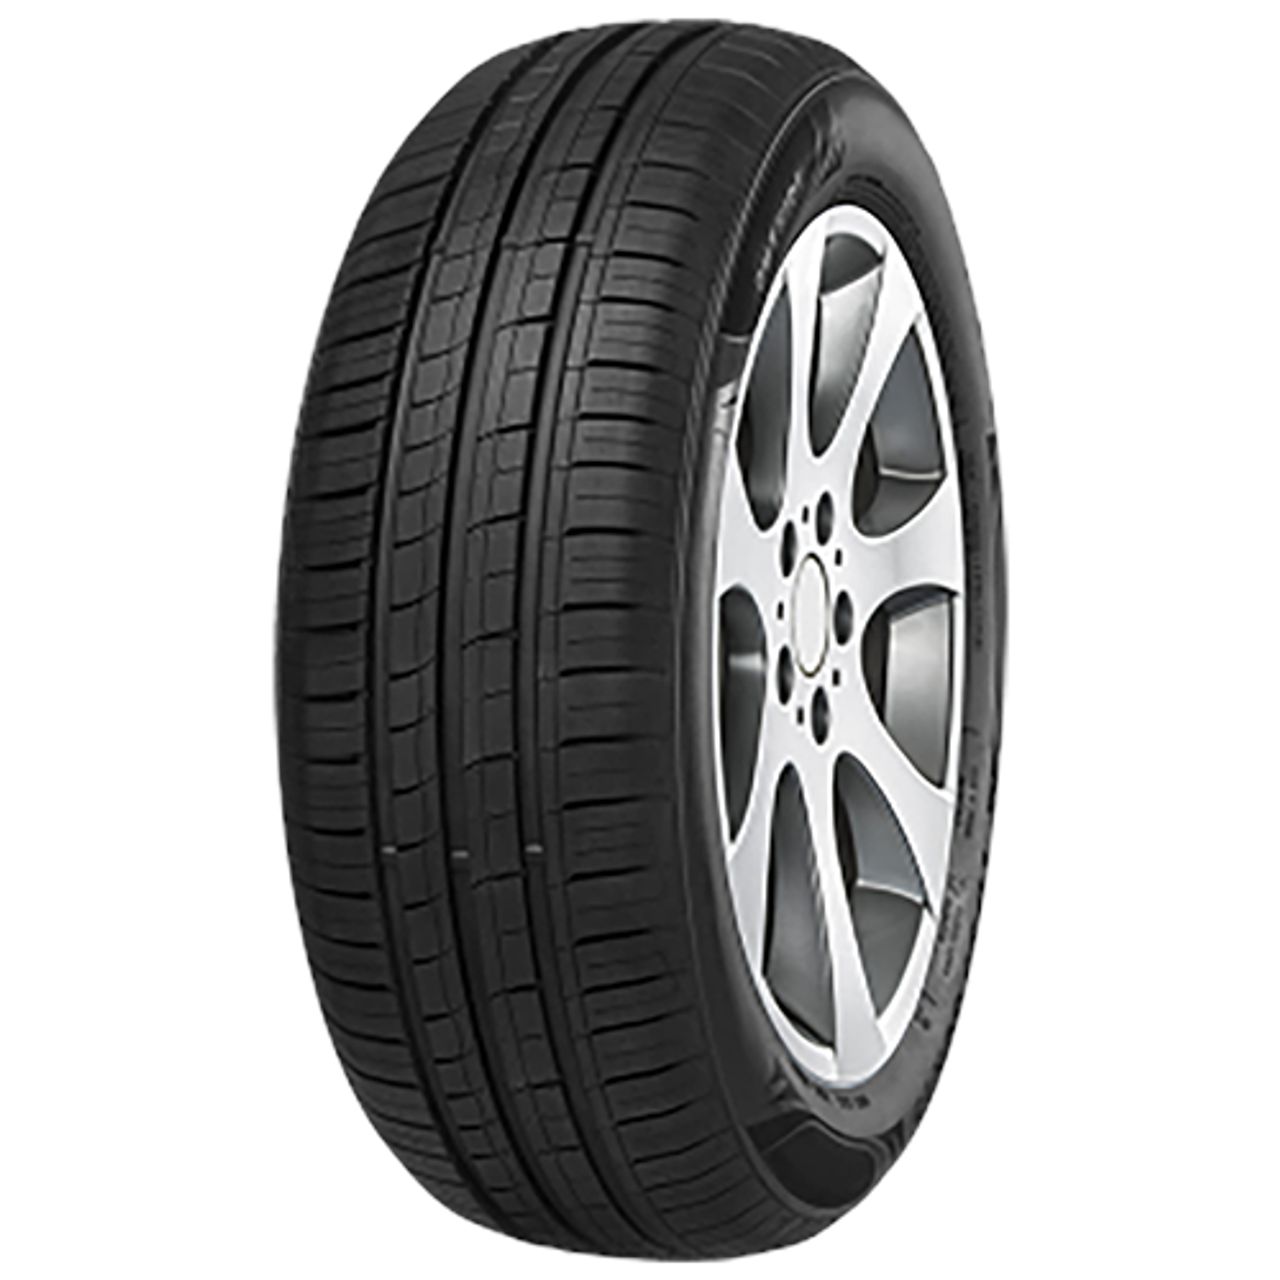 IMPERIAL ECODRIVER 4 185/70R14 88T